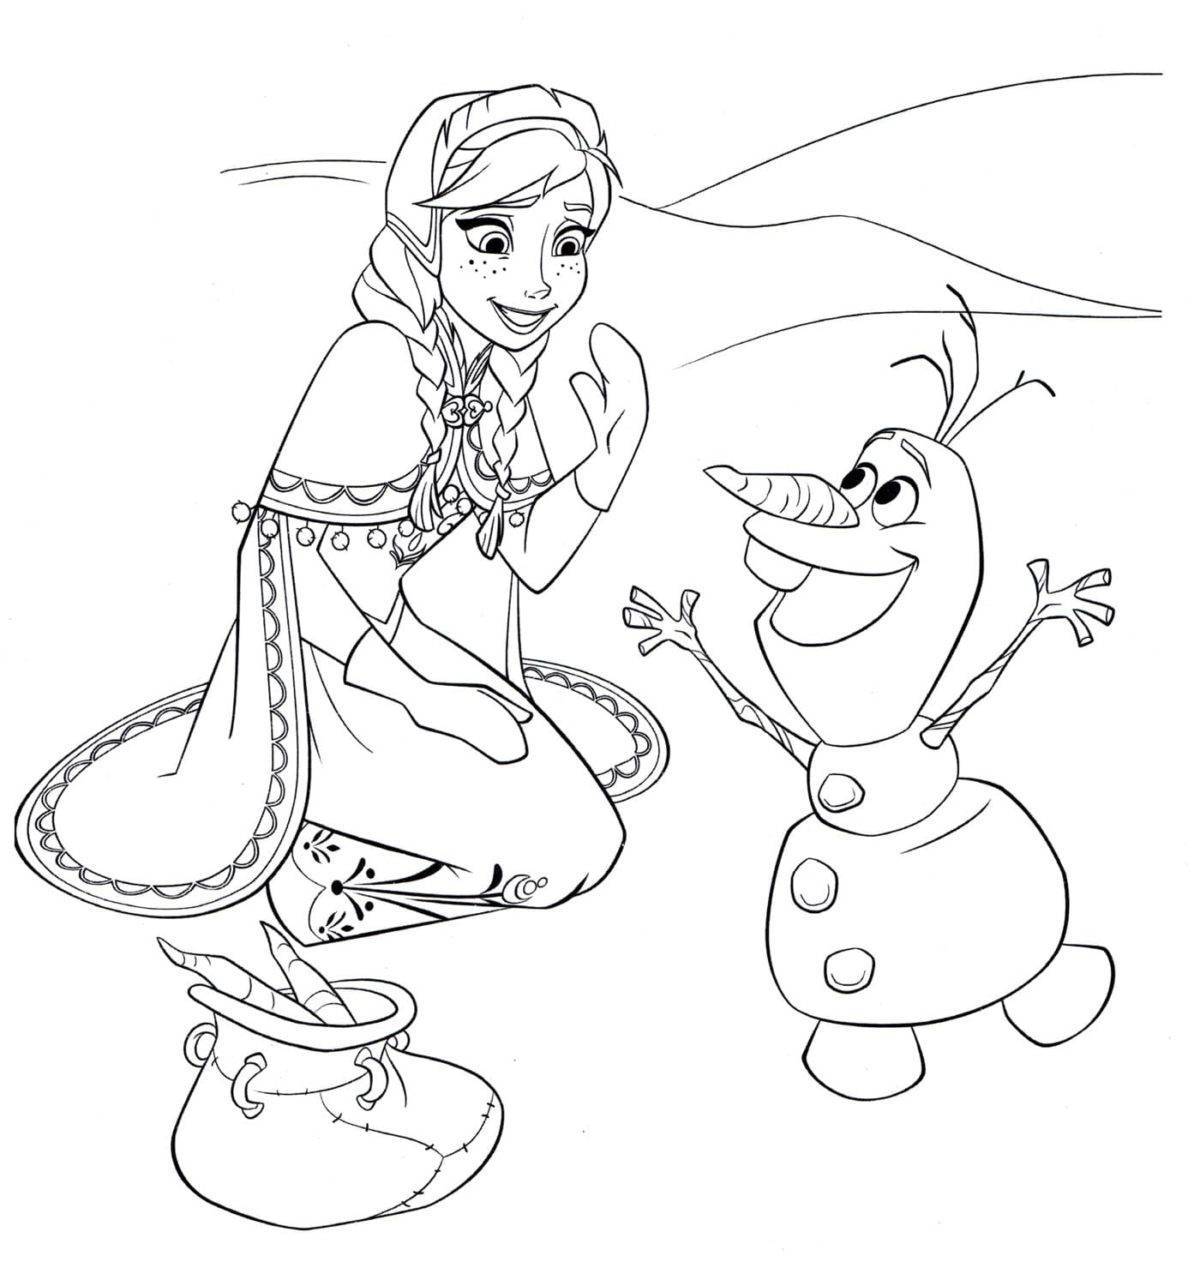 Dazzlingly cold heart coloring pages for kids